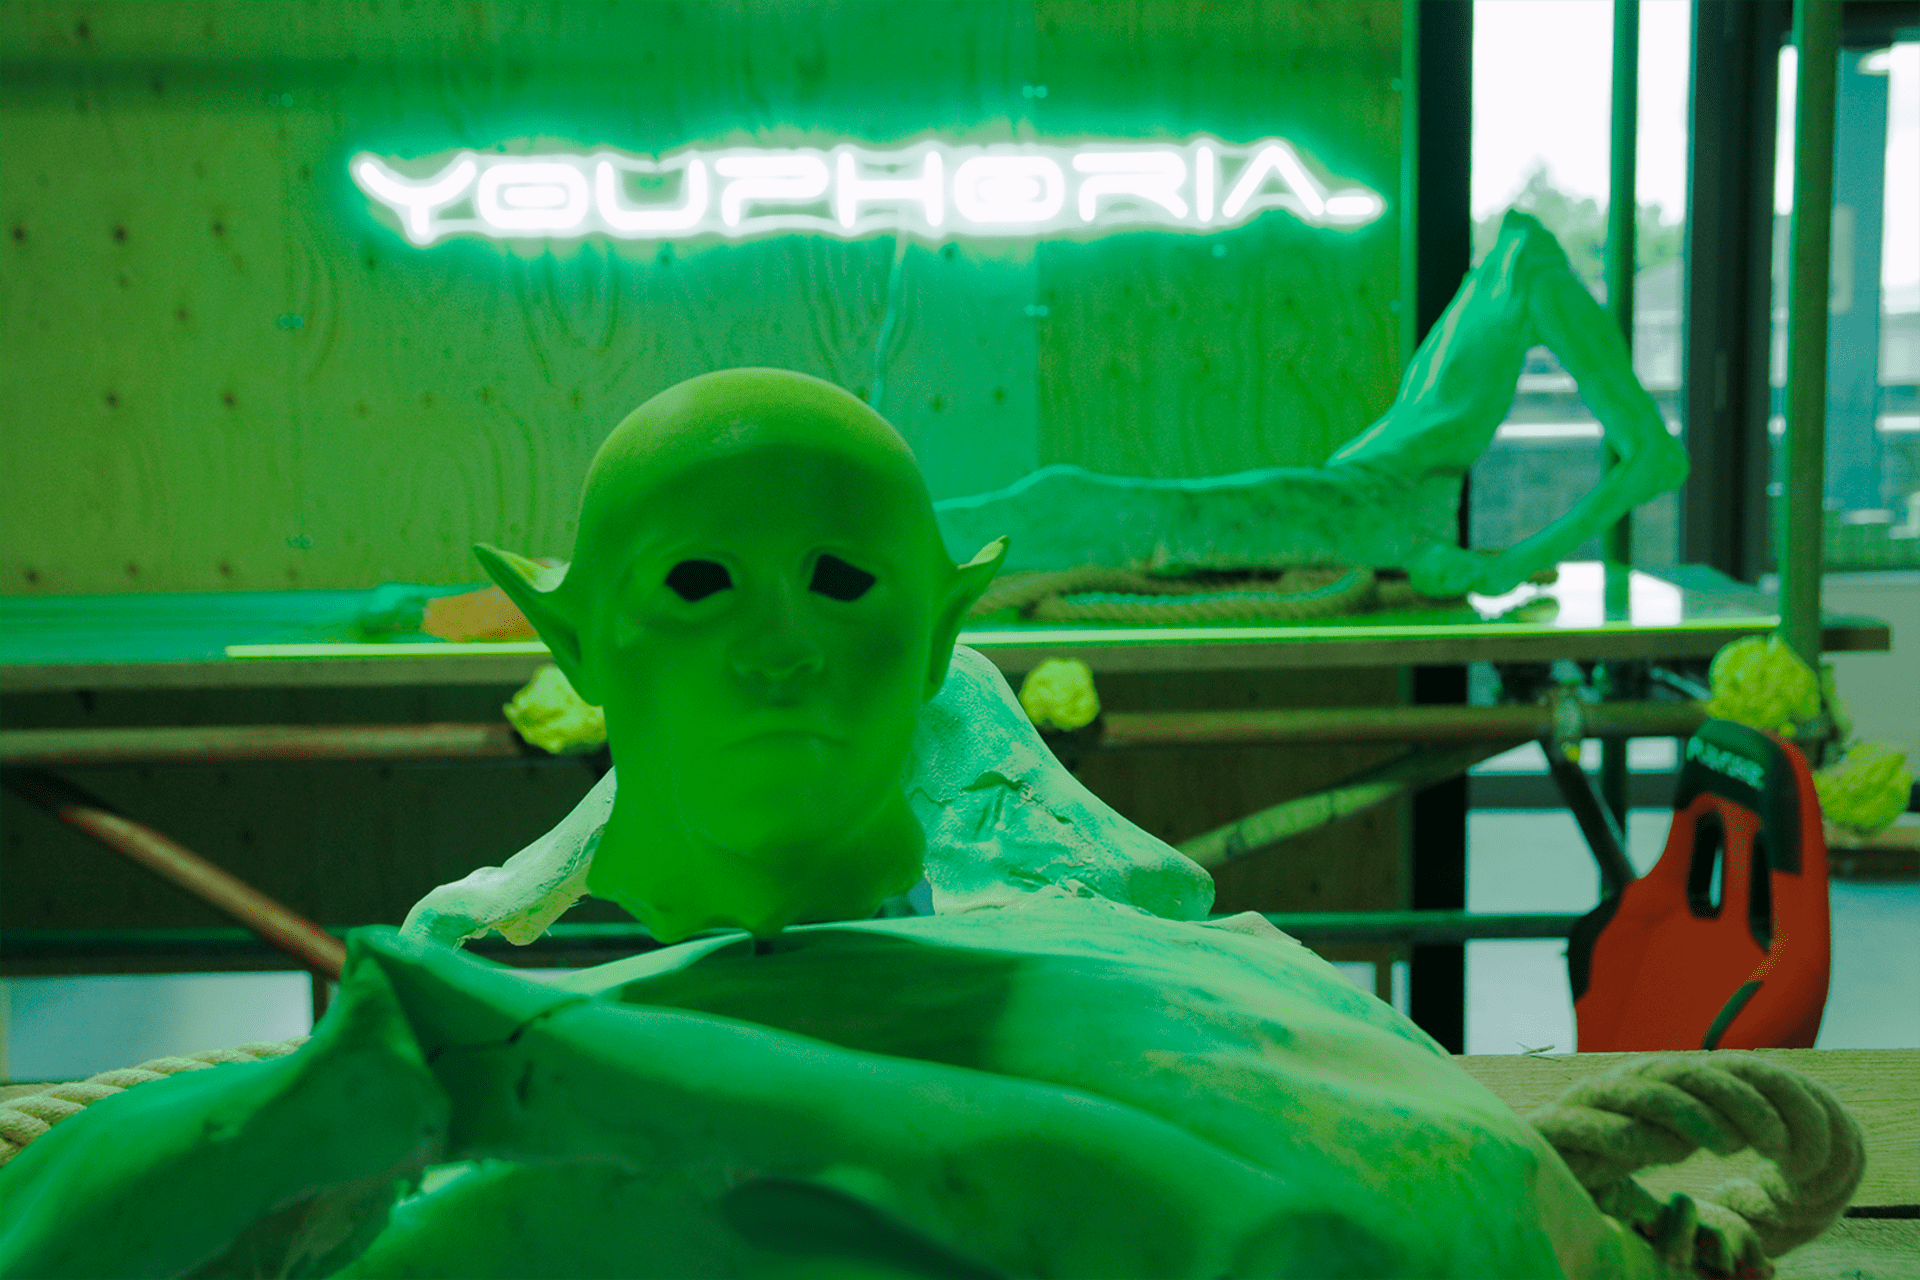 A photograph of a life-size mask of a head with large, pointed ears, and a semi-reclined headless figure on a table. A neon sign in the background, which reads ‘youphoria’, casts a green light over the objects.